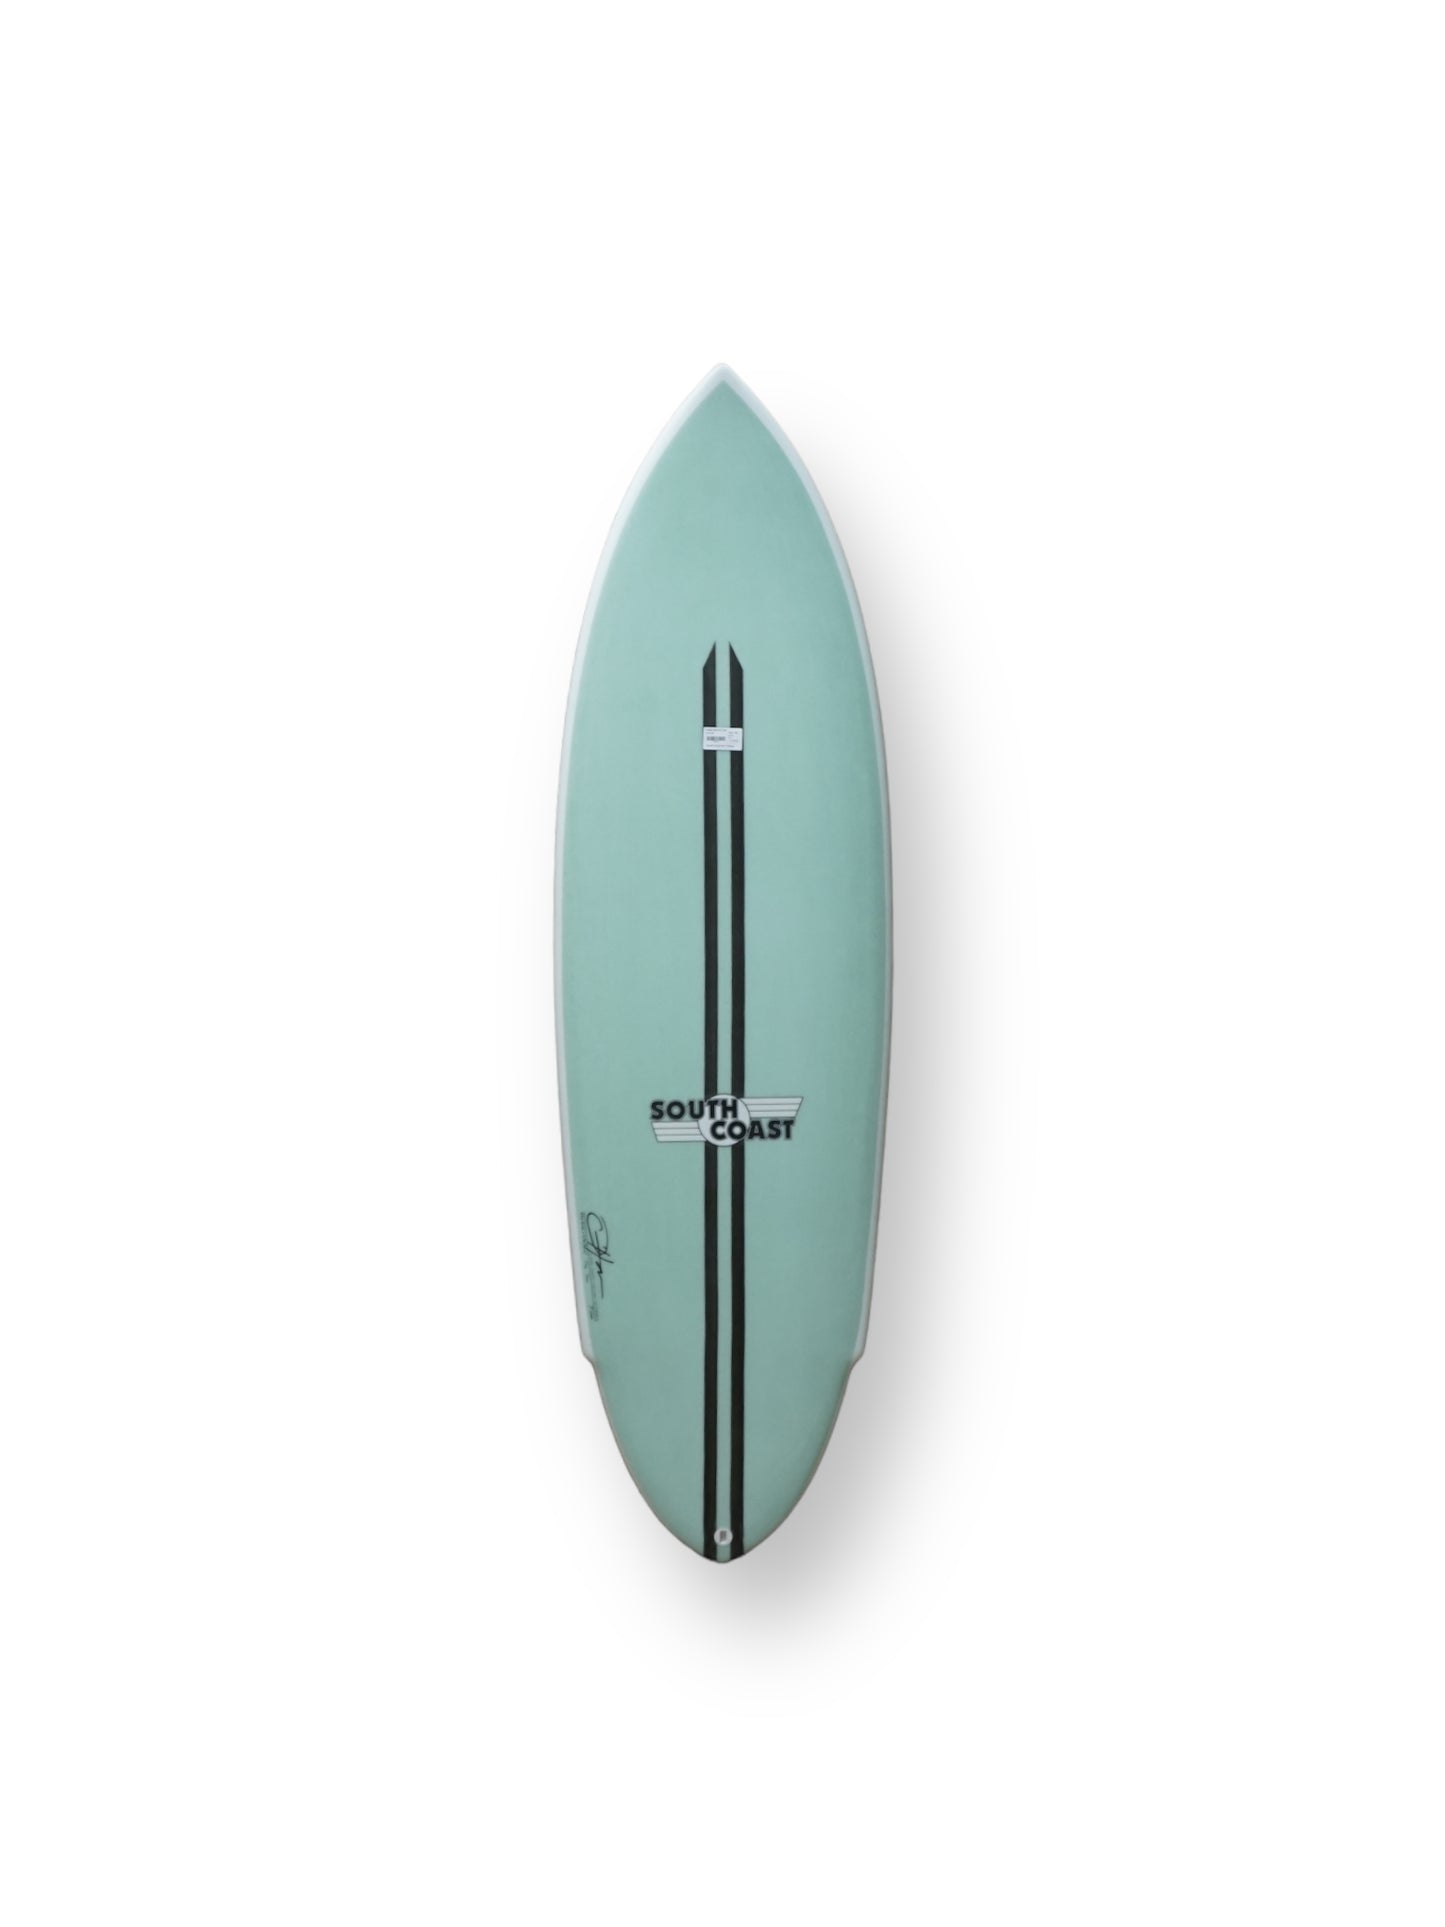 SOUTH COAST THE DON SURFBOARD 5'9"